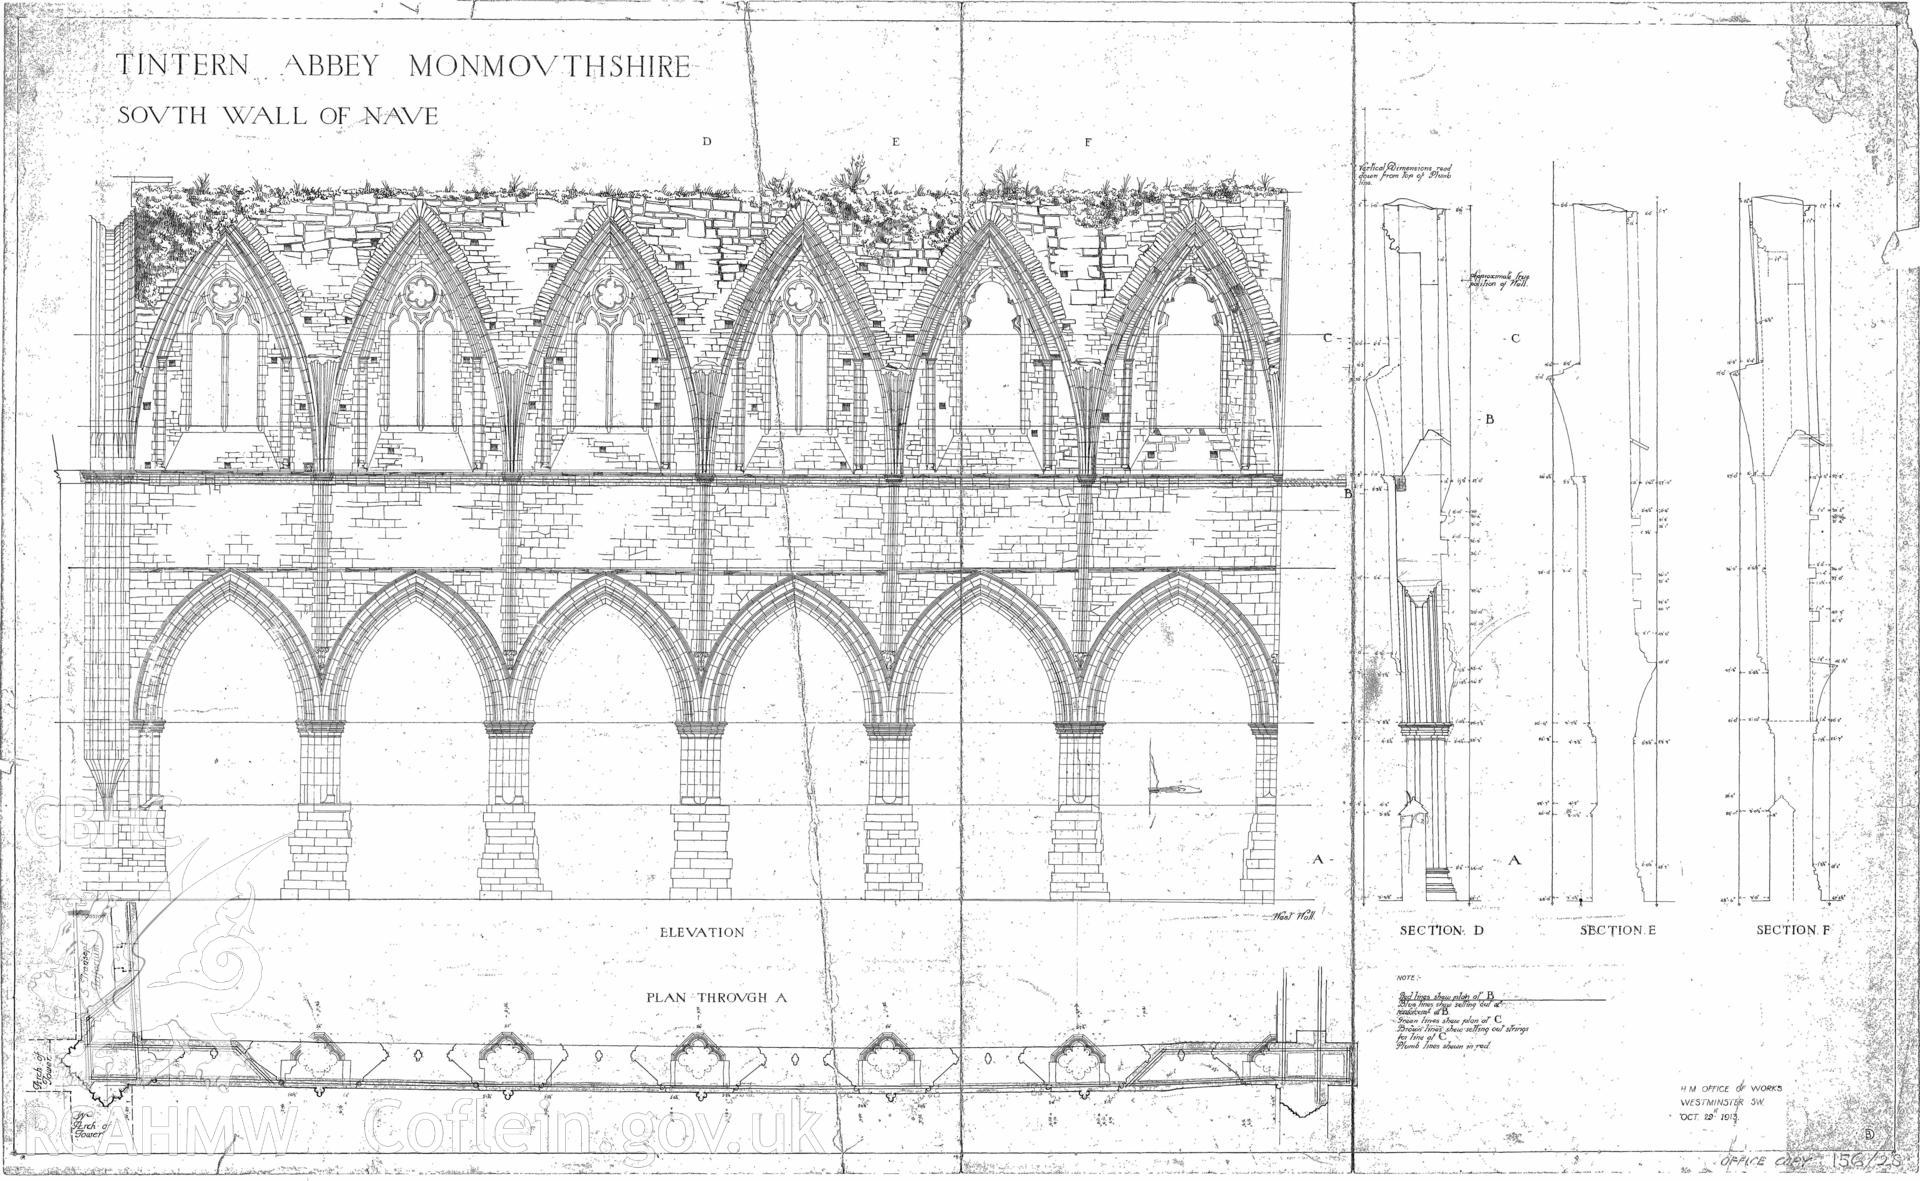 Cadw guardianship monument drawing of Tintern Abbey. Sections S Wall of Nave. Cadw ref. No. 156/28. Scale 1:1:20.